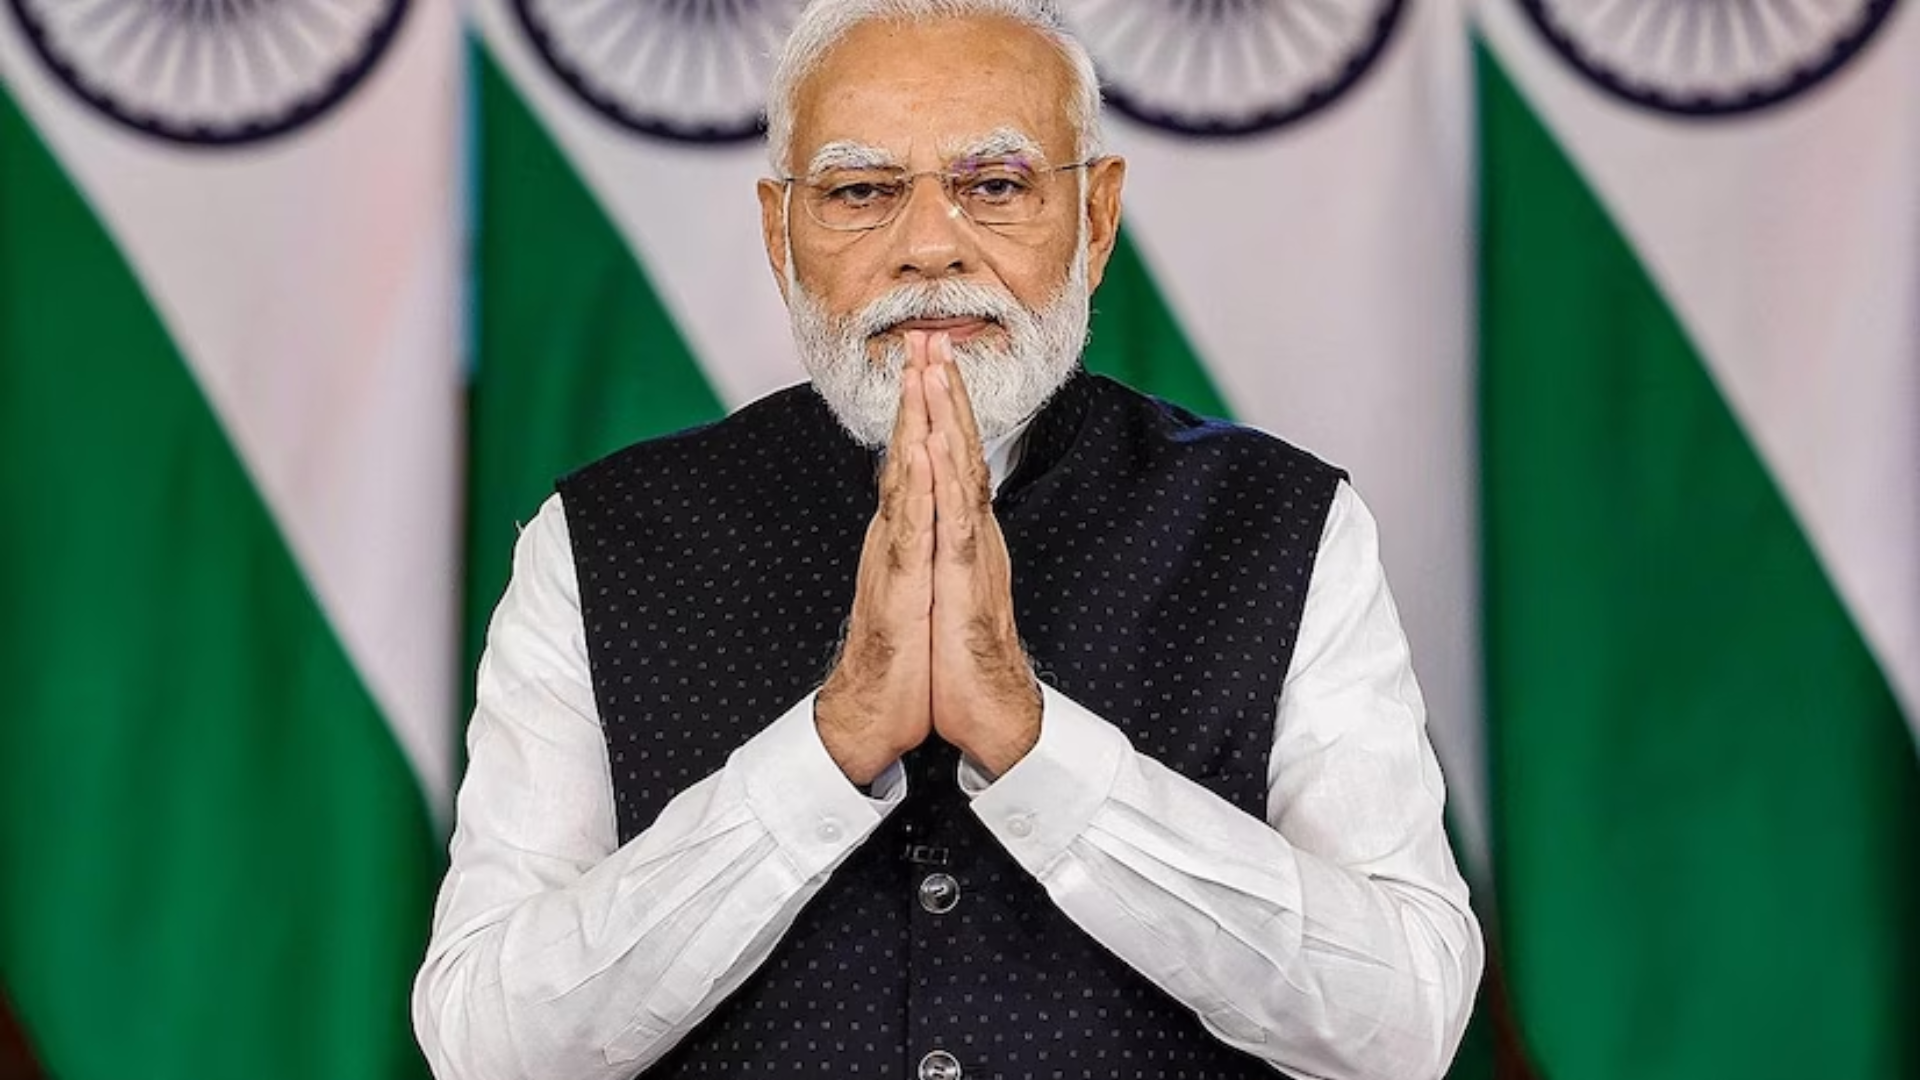 PM Modi Scheduled To Deliver Four Large Rallies In North Karnataka Today